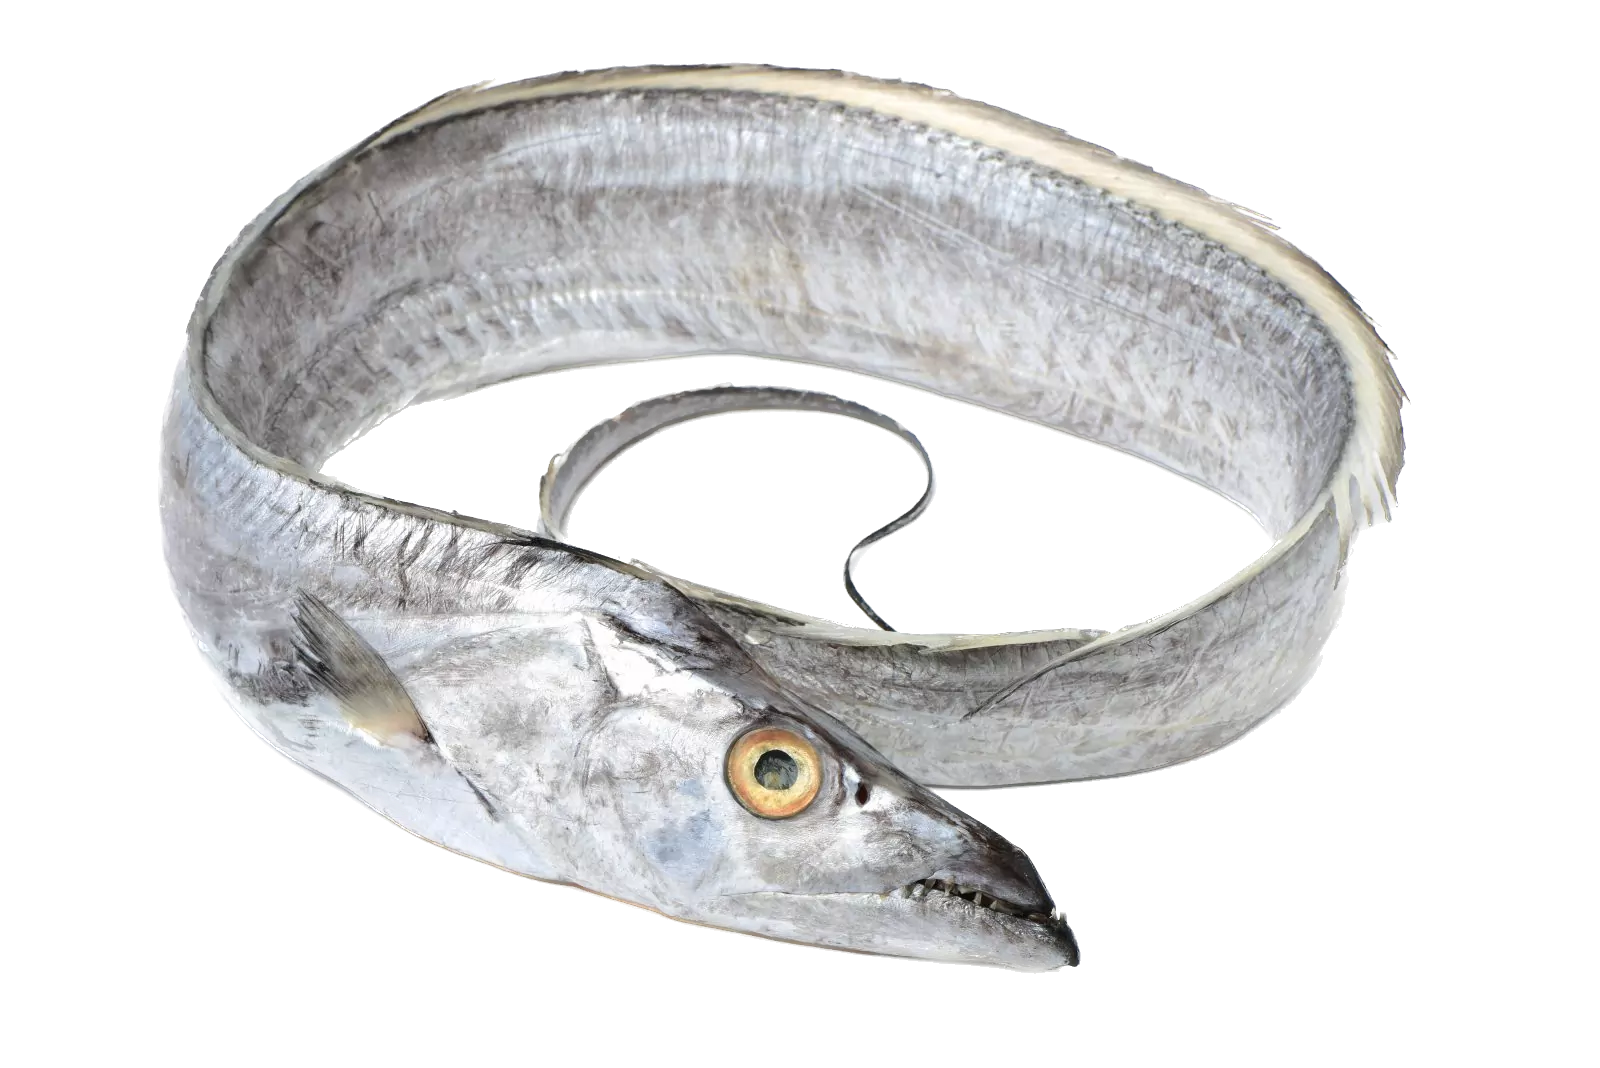 The ribbonfish are any lampriform fishes in the family Trachipteridae. These pelagic fish are named for their slim, ribbon-like appearance